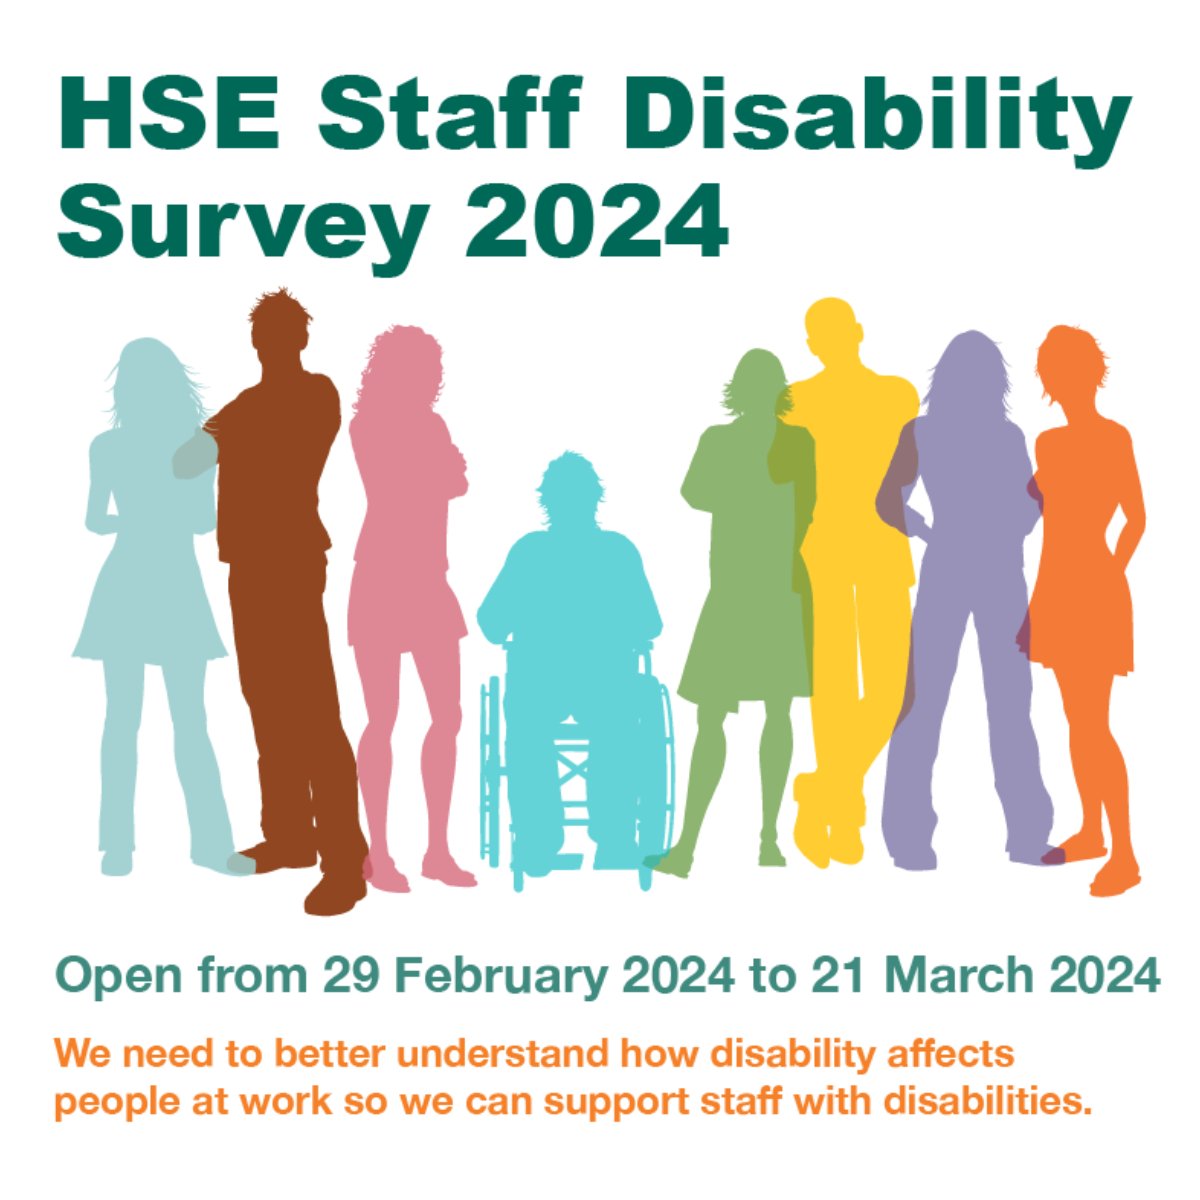 The HSE Staff Disability Survey is open to all HSE staff from today until Thursday 21 March. Please take the time to help us better understand the barriers and difficulties experienced by staff with disabilities in the workplace. Take the survey: bit.ly/3SZb2Ge